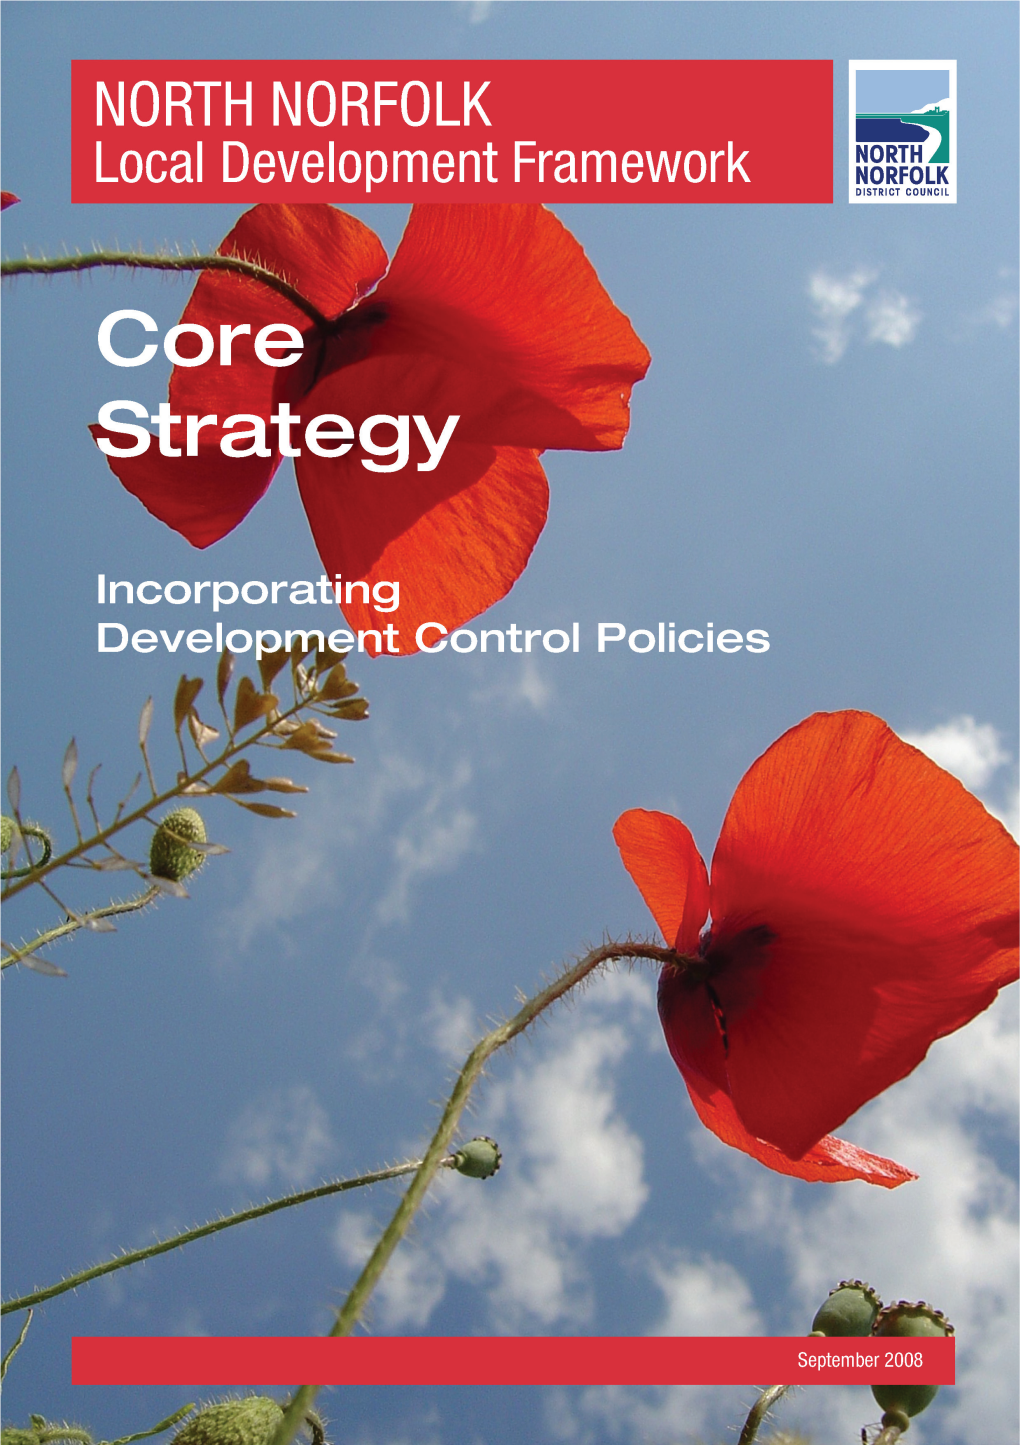 Core Strategy (Incorporating Development Control Policies